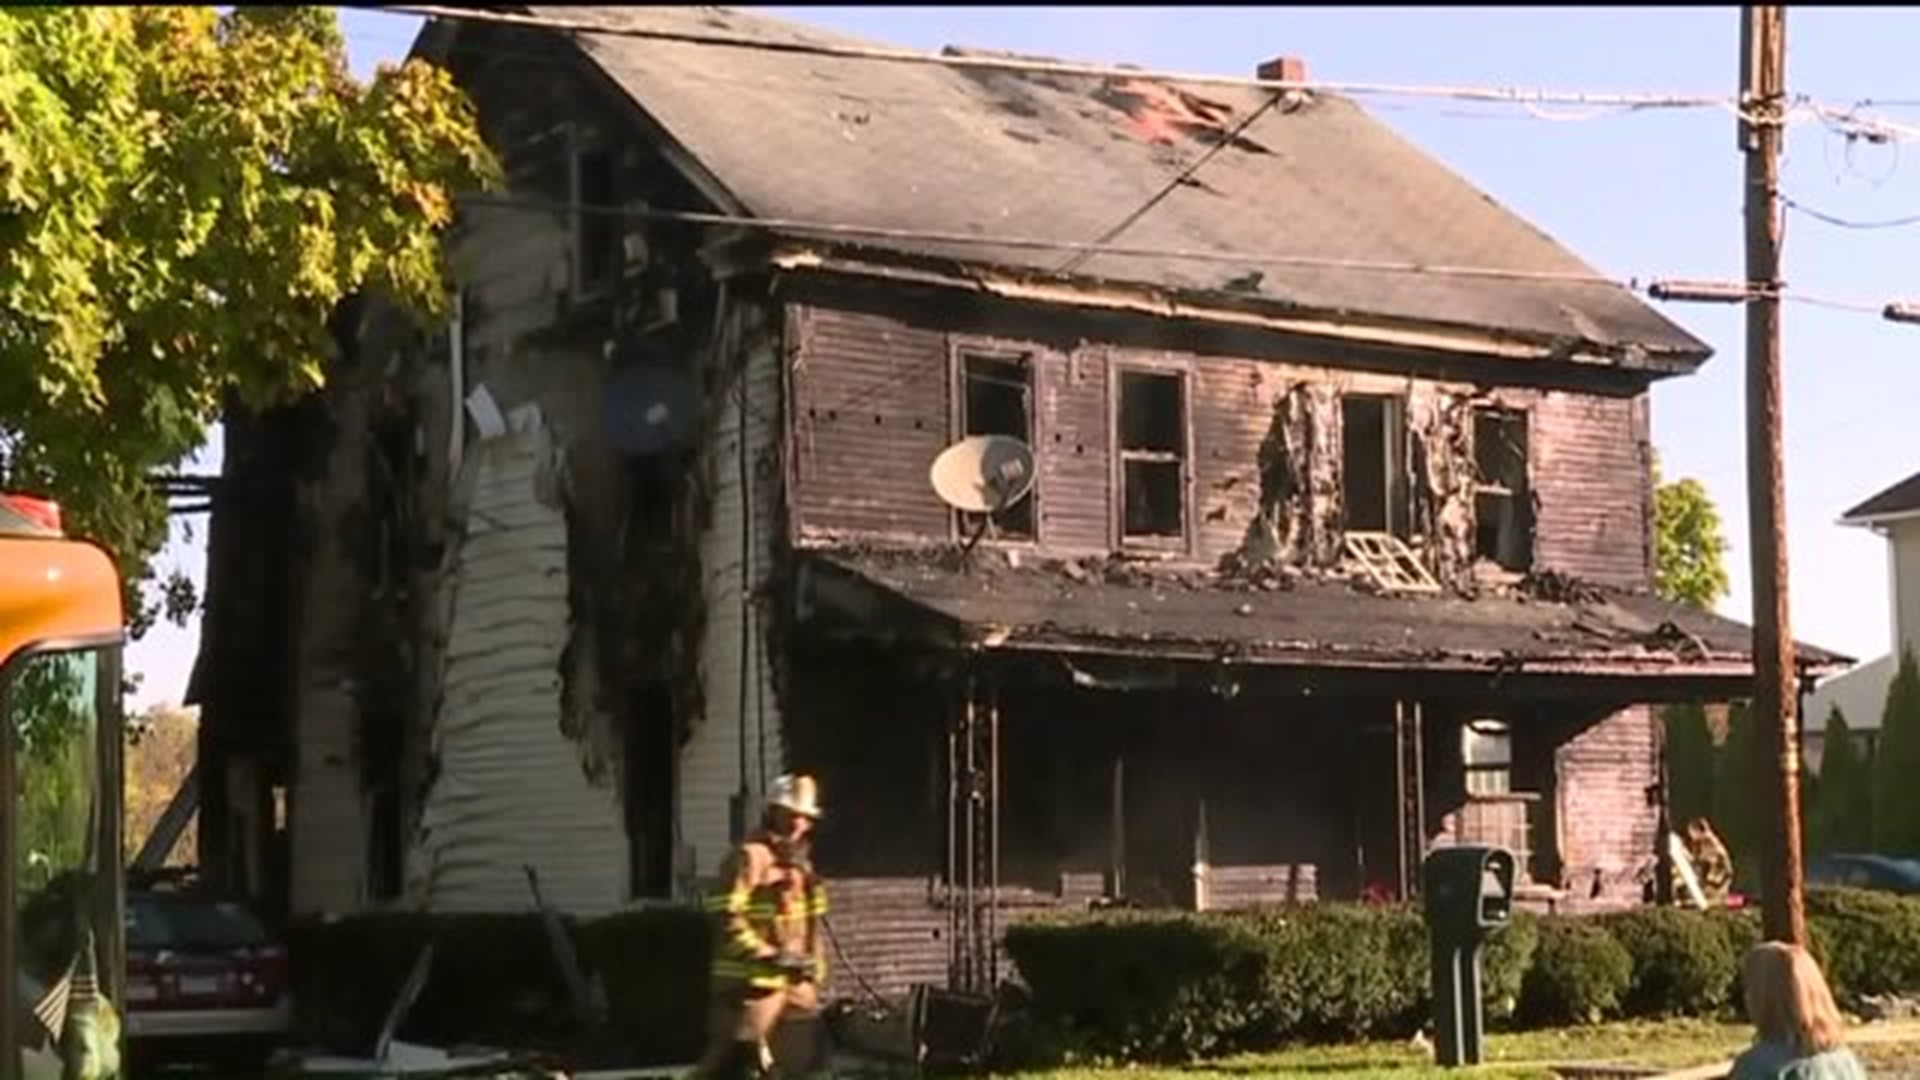 Heartbreak After Deadly Fire in Northumberland County